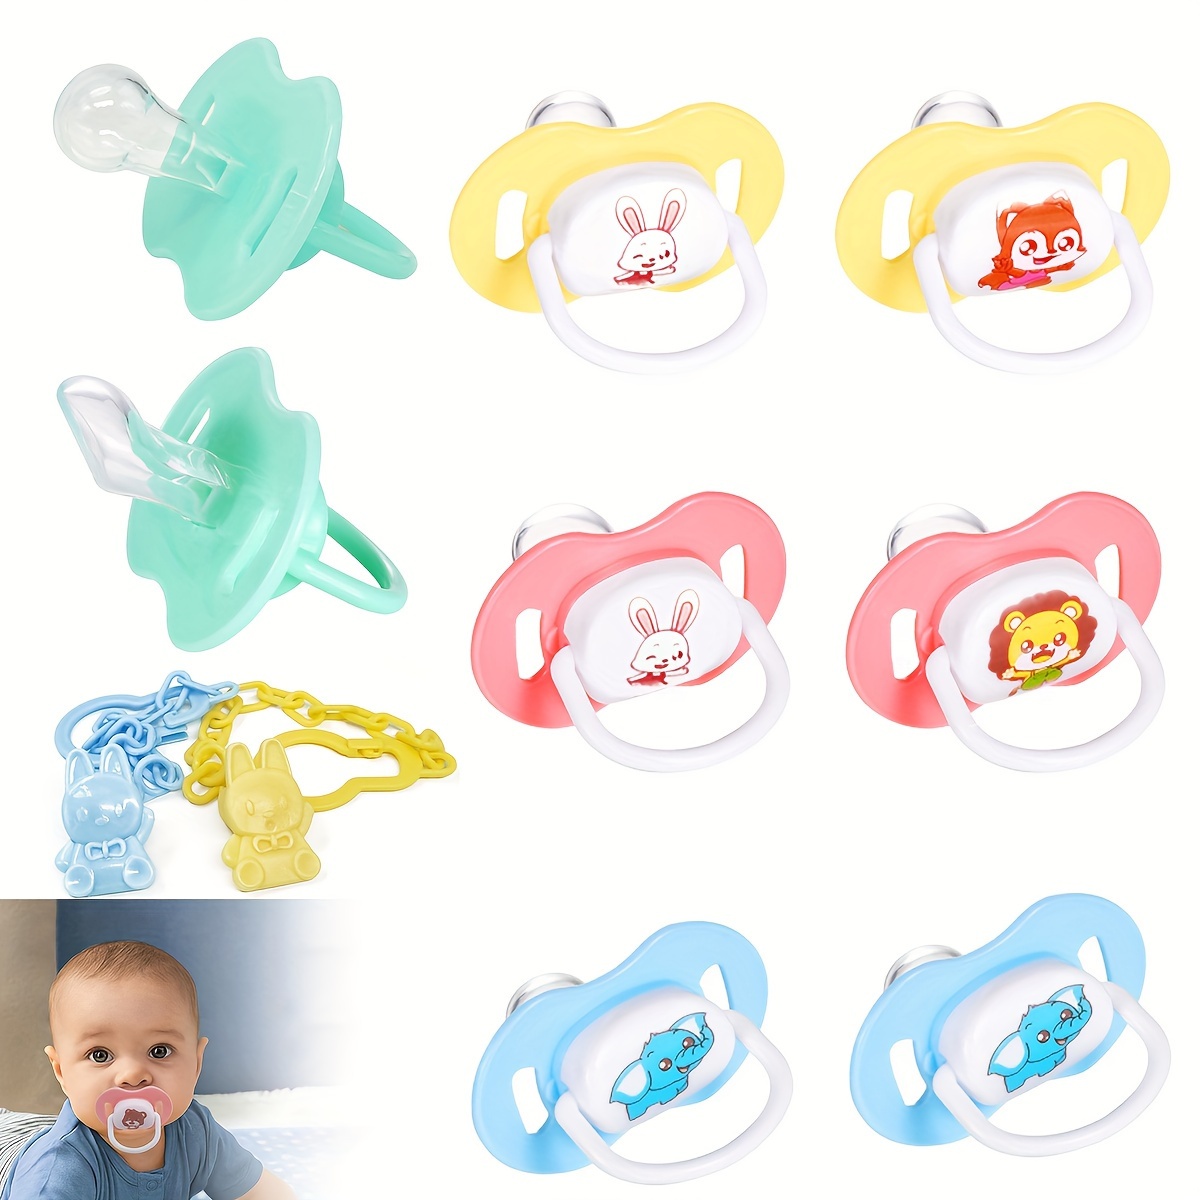 Best baby clips for dummies